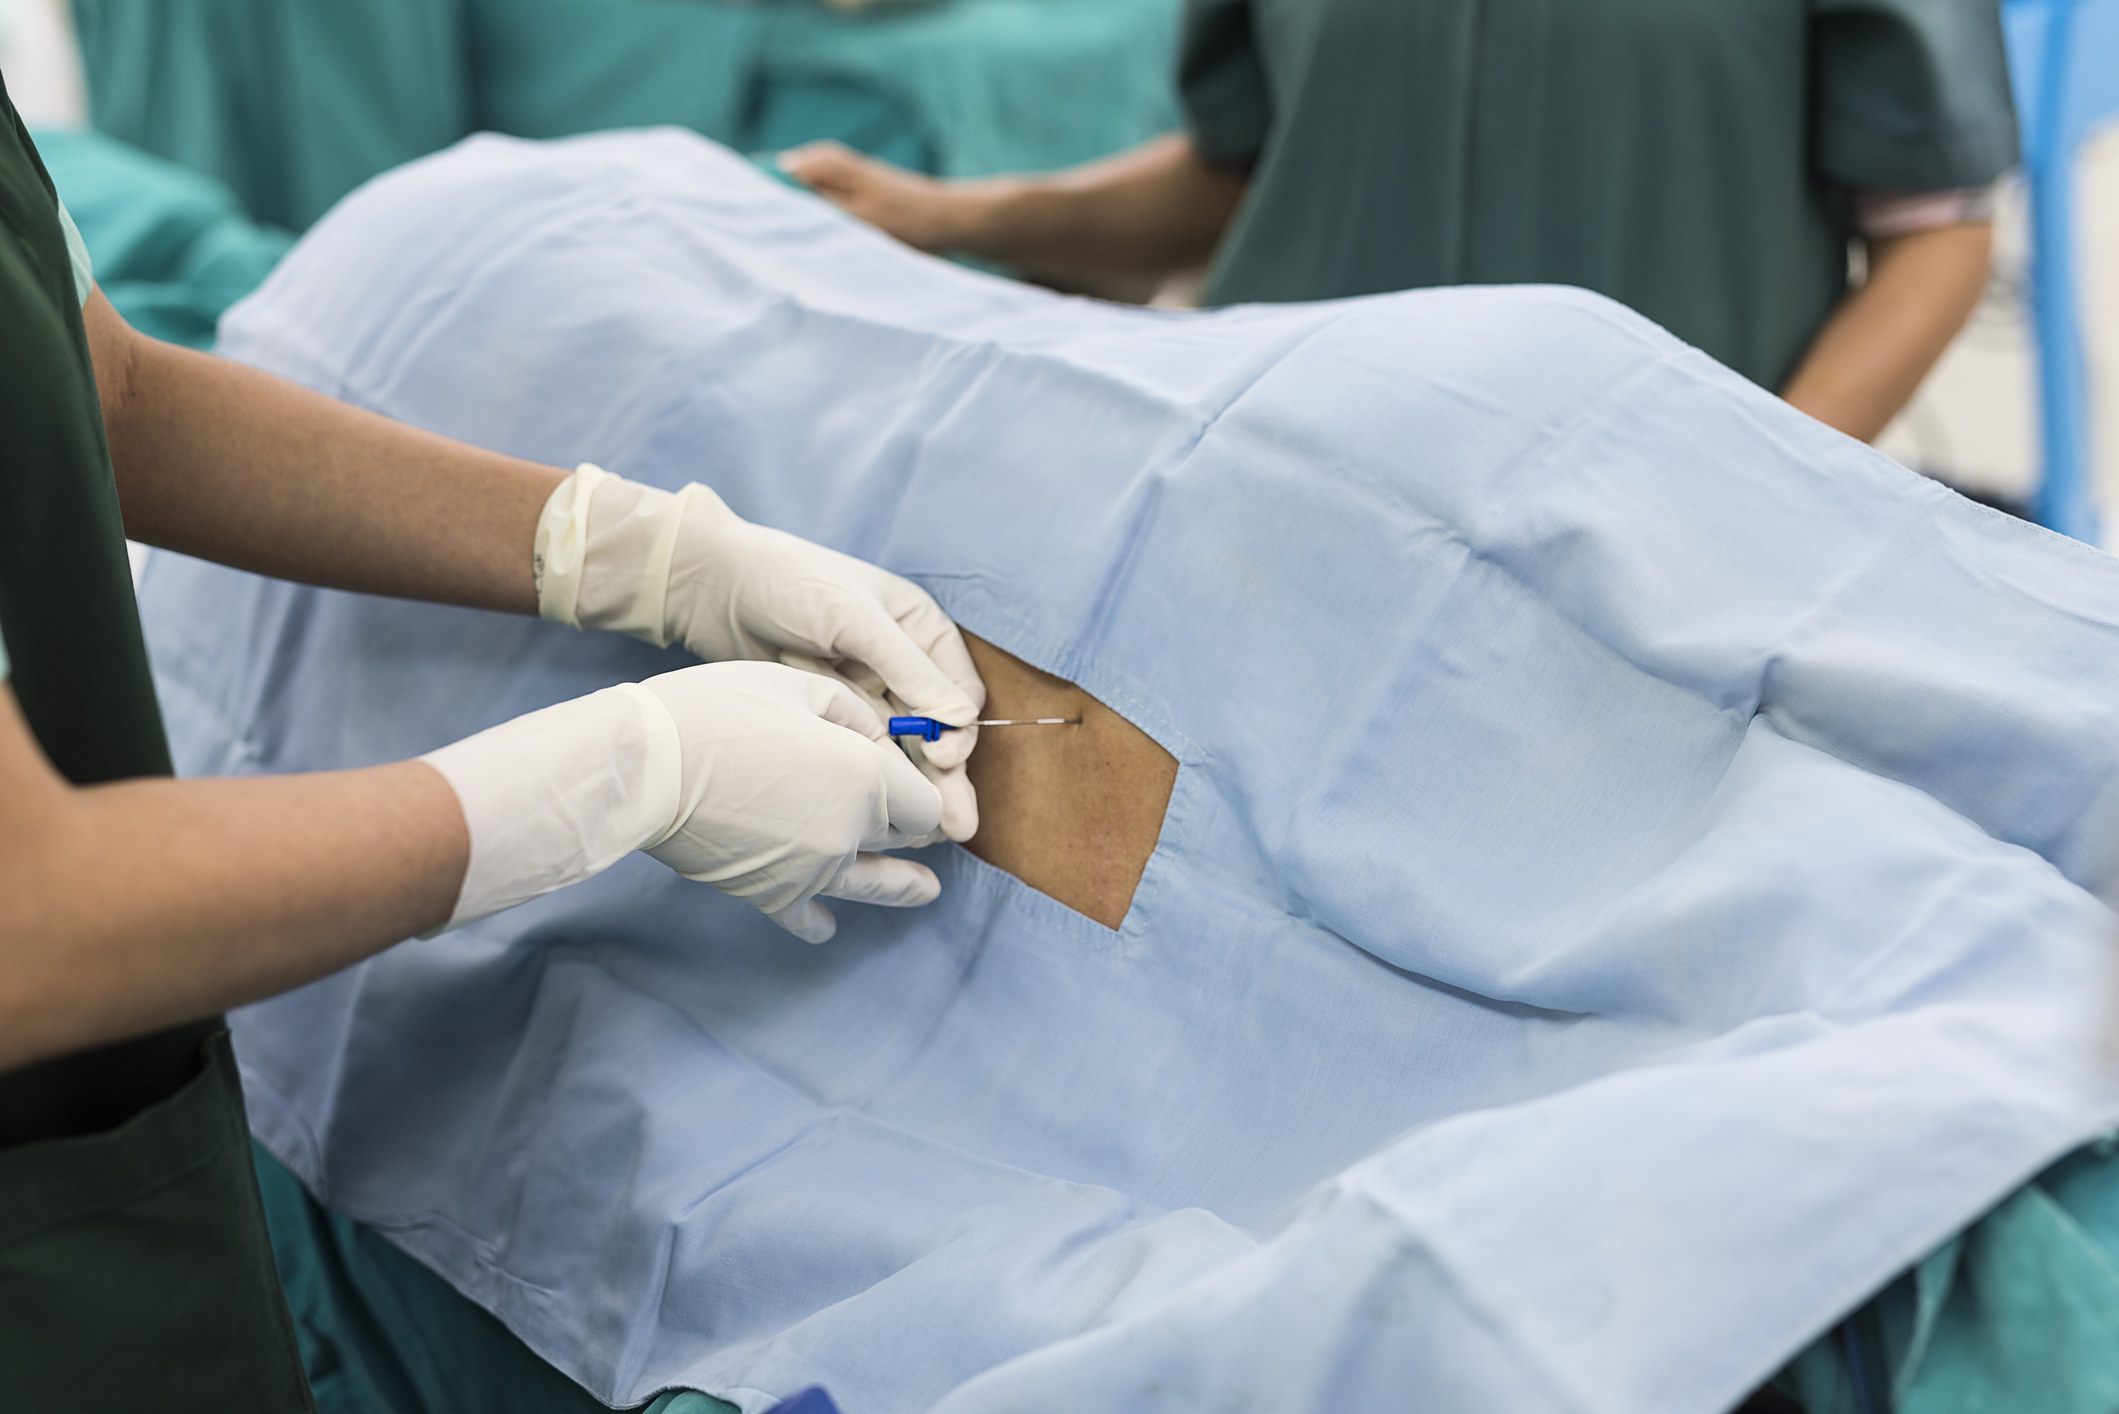 An epidural being administerd to a patient